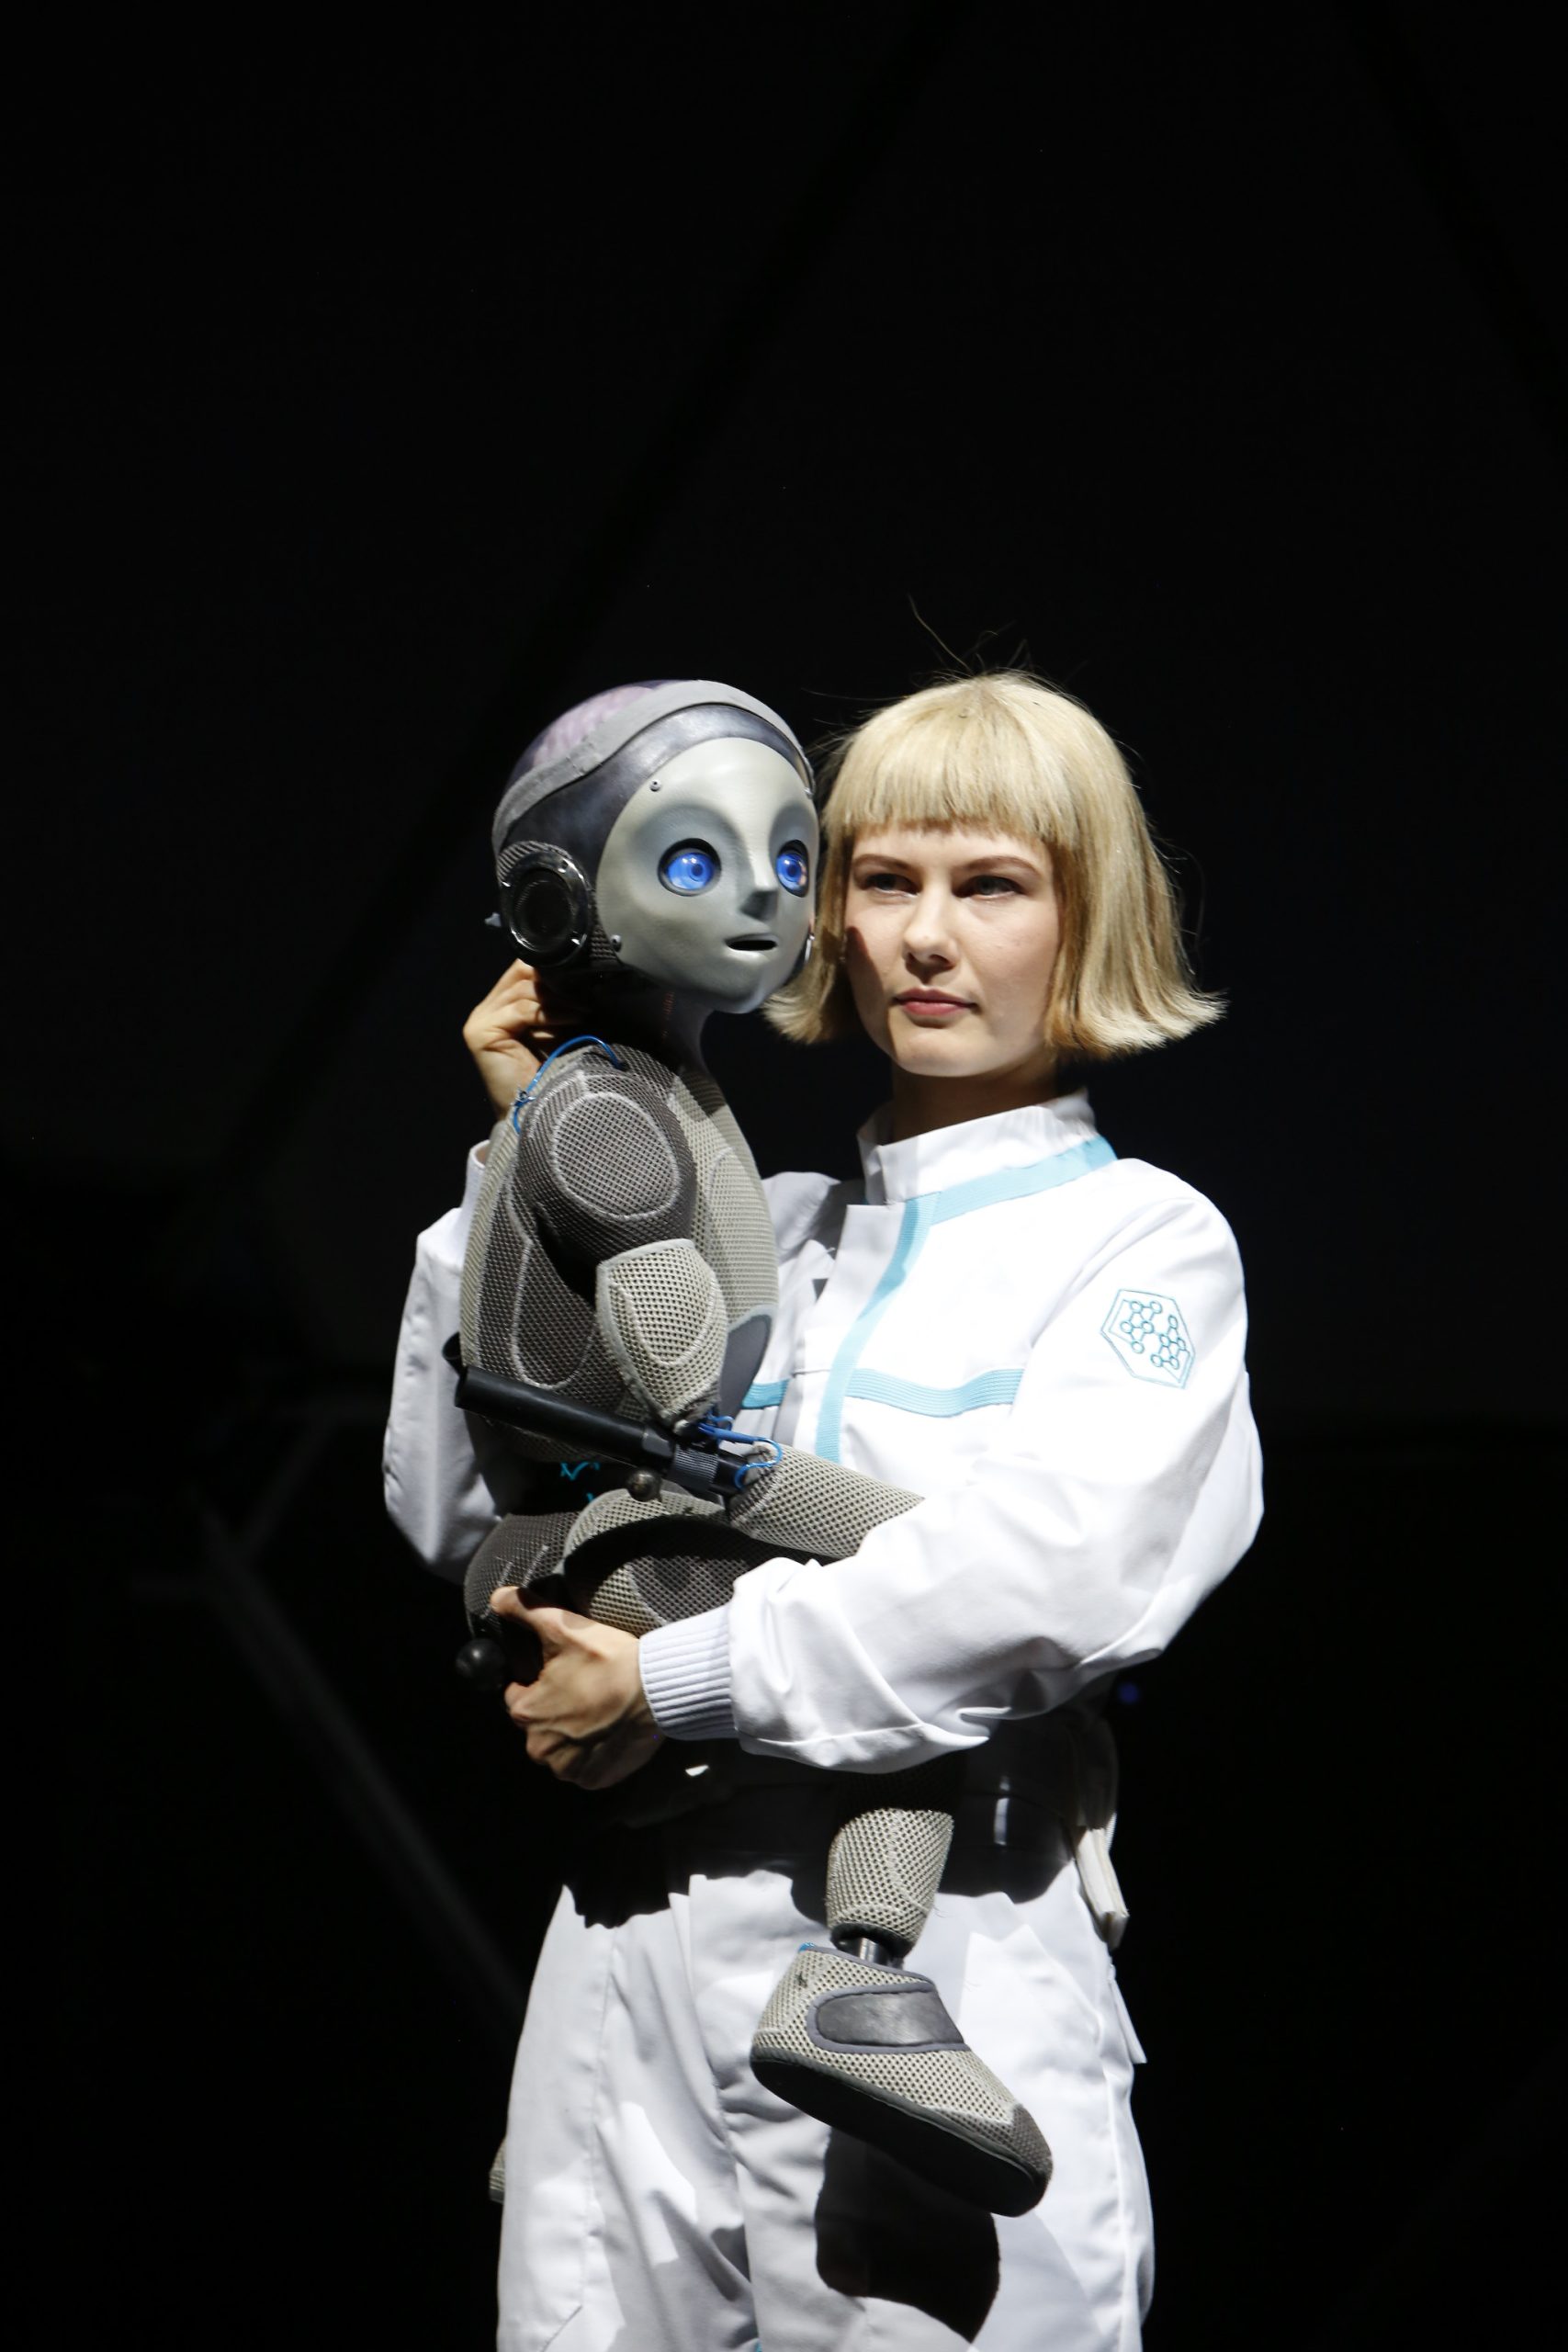 a puppeteer manipulate Robot Boy puppet who she holds against her waist against a black background.